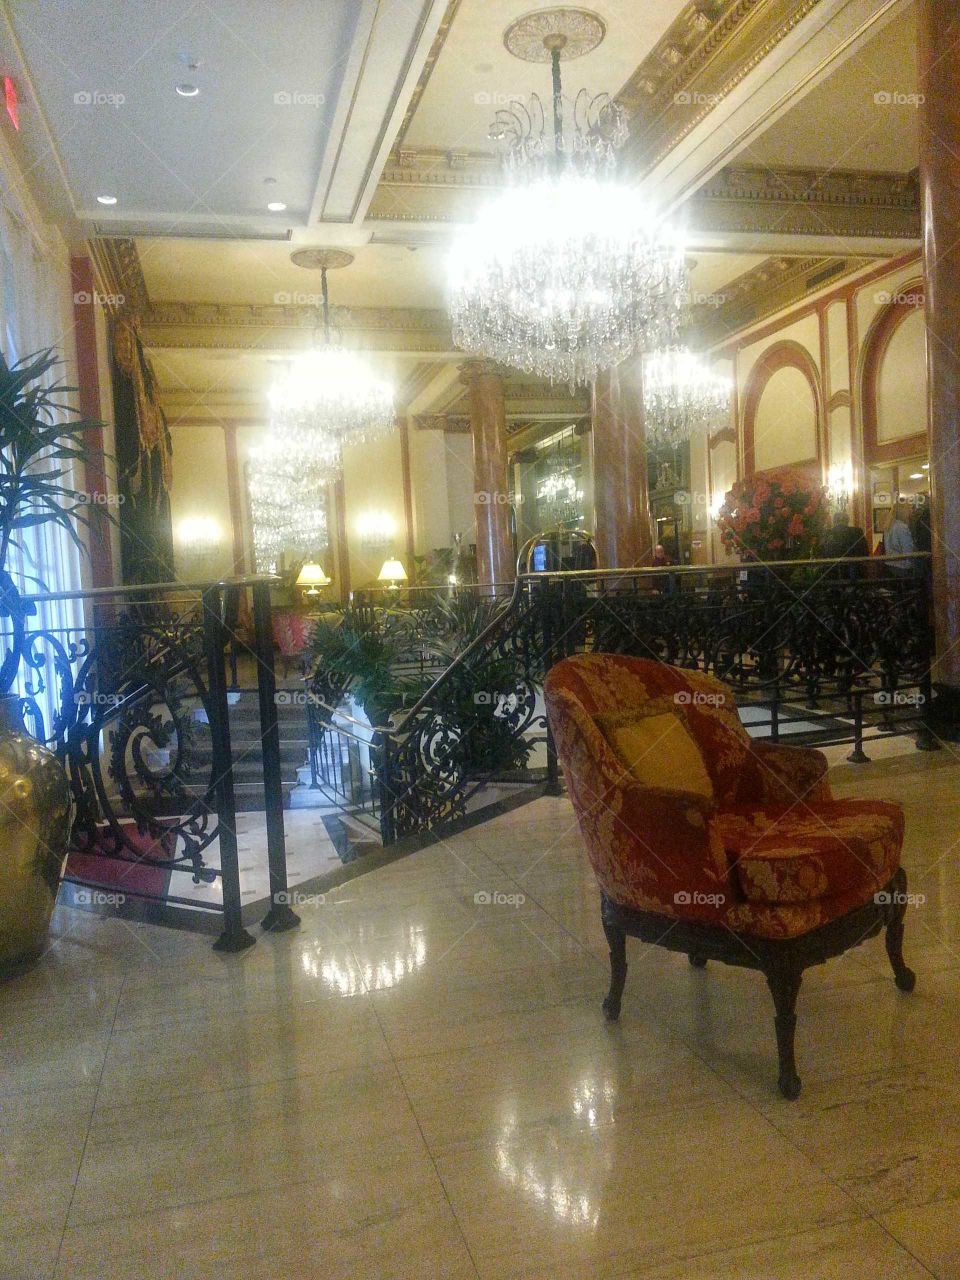 Hotel lobby in New Orleans.